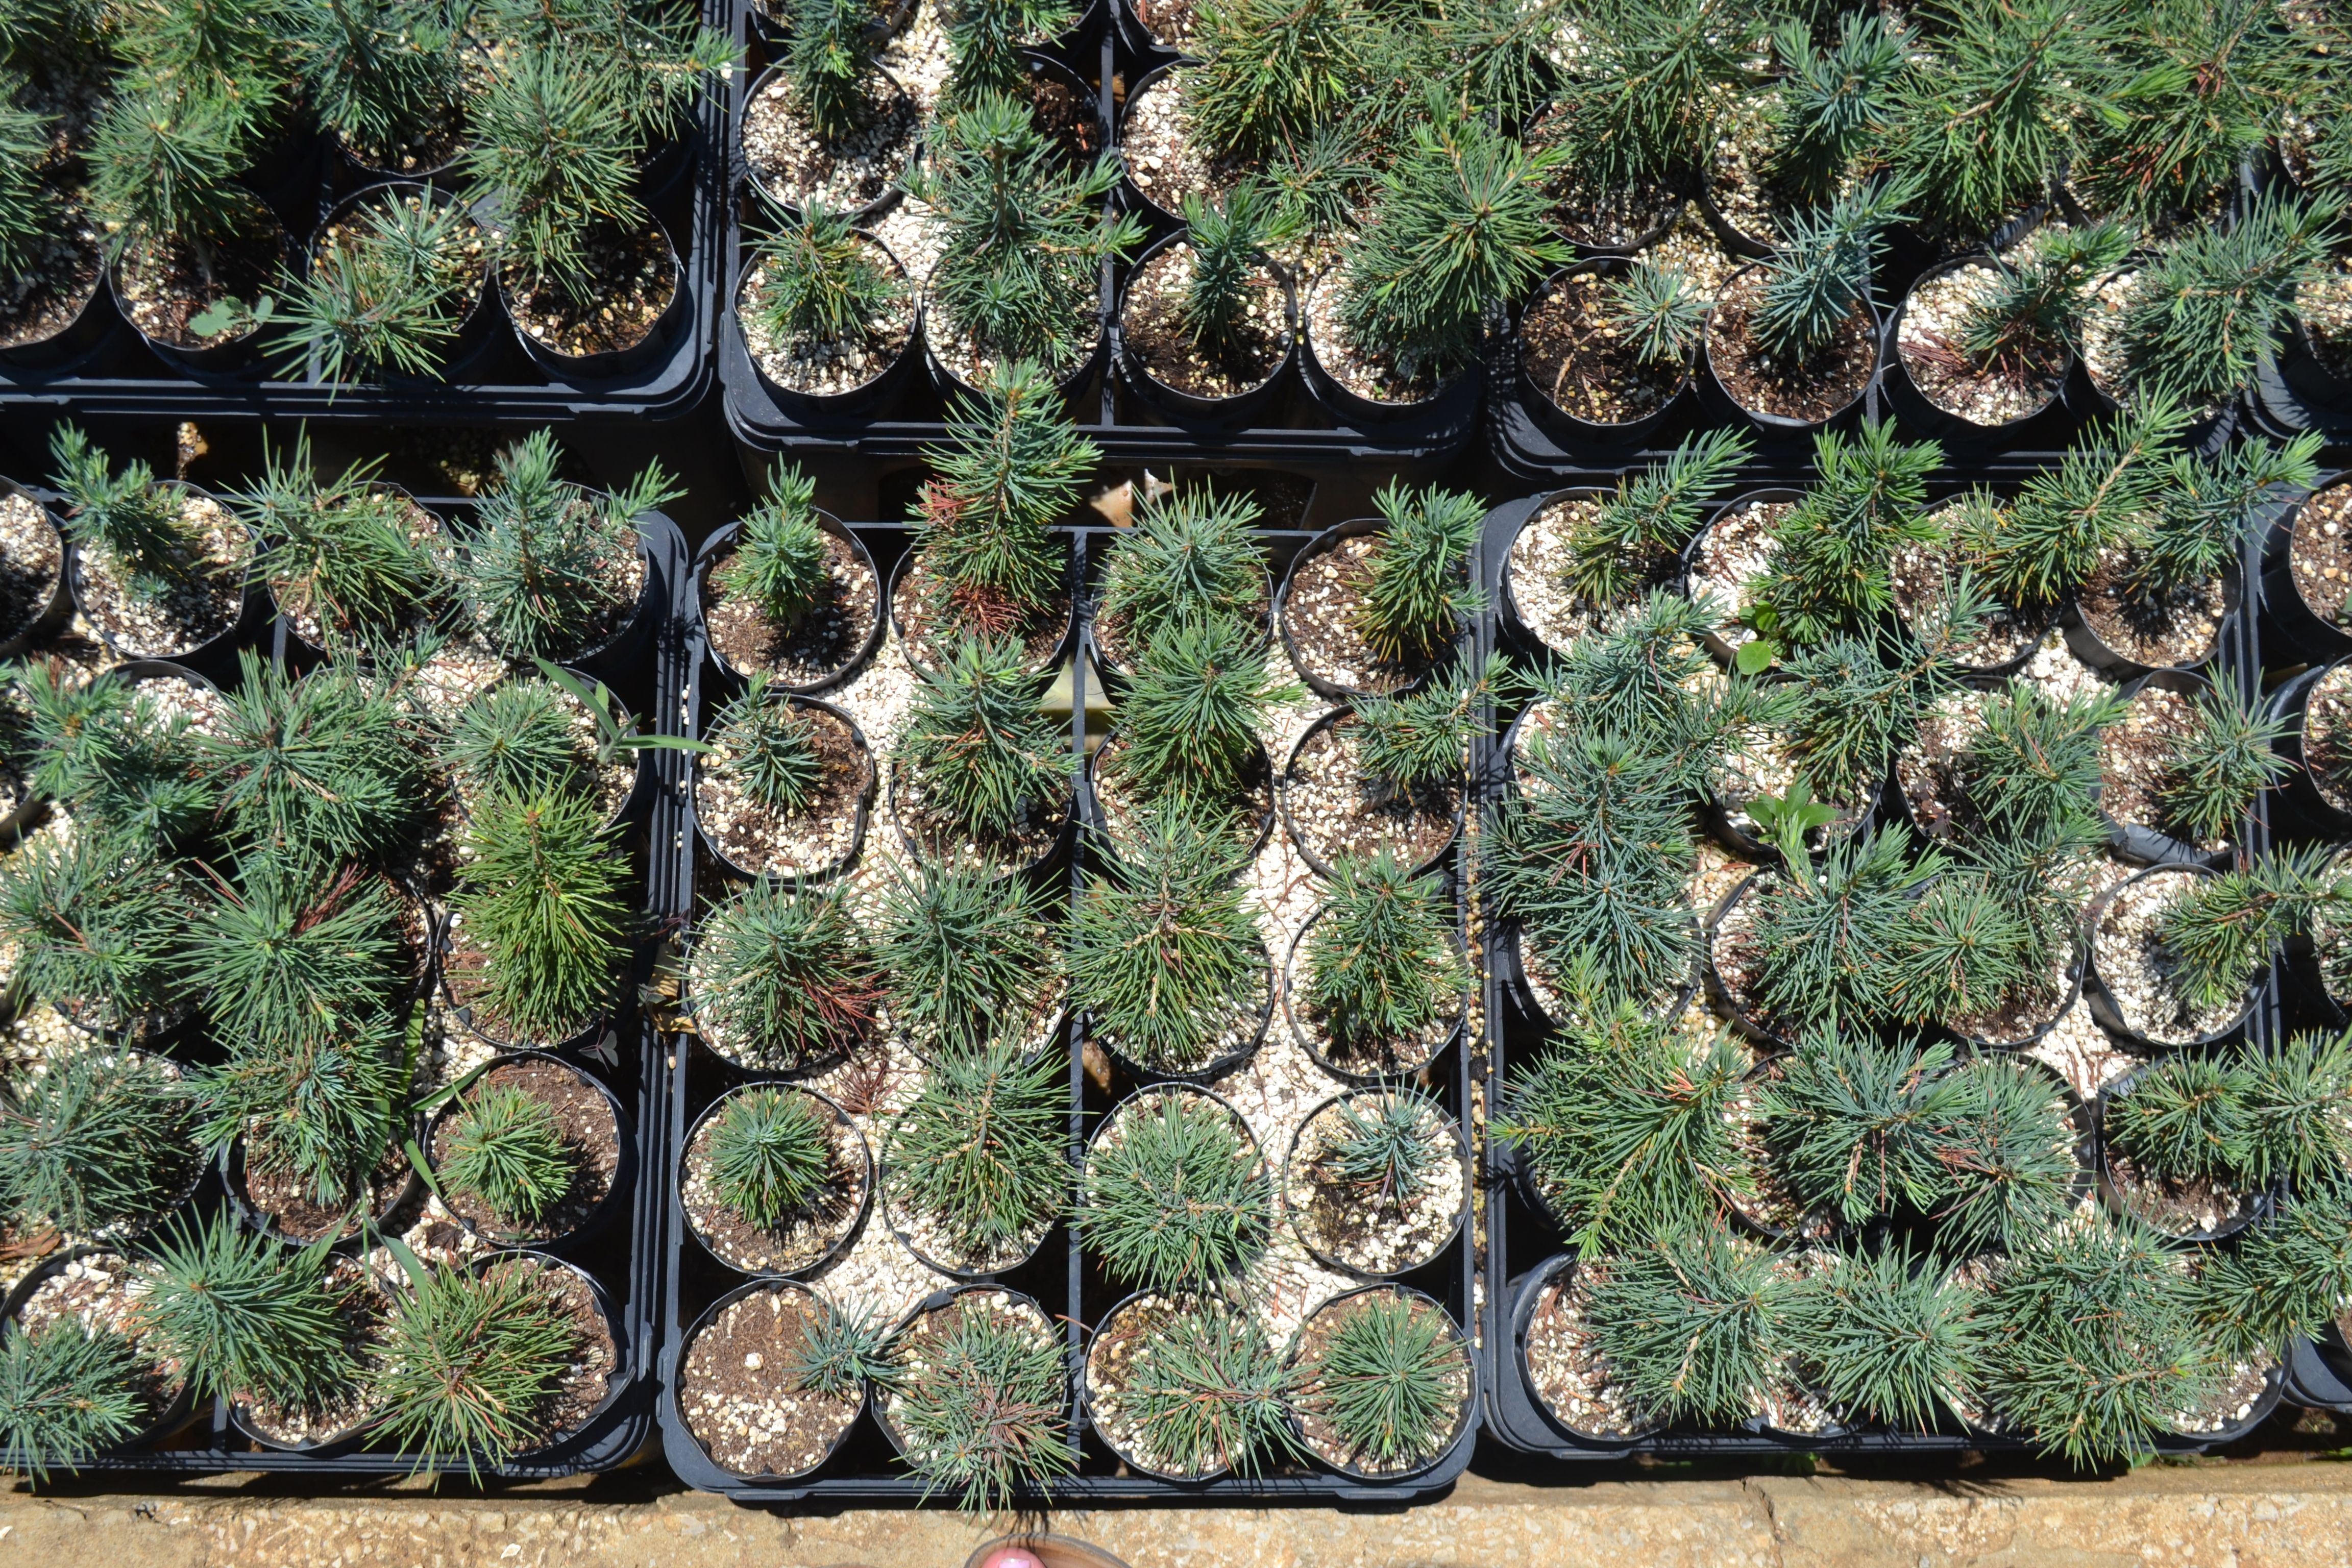 Cedar seedlings in the nursery of the Friends of the Cedar Forest Committee. Image by Catherine Cartier. Lebanon, 2019. 